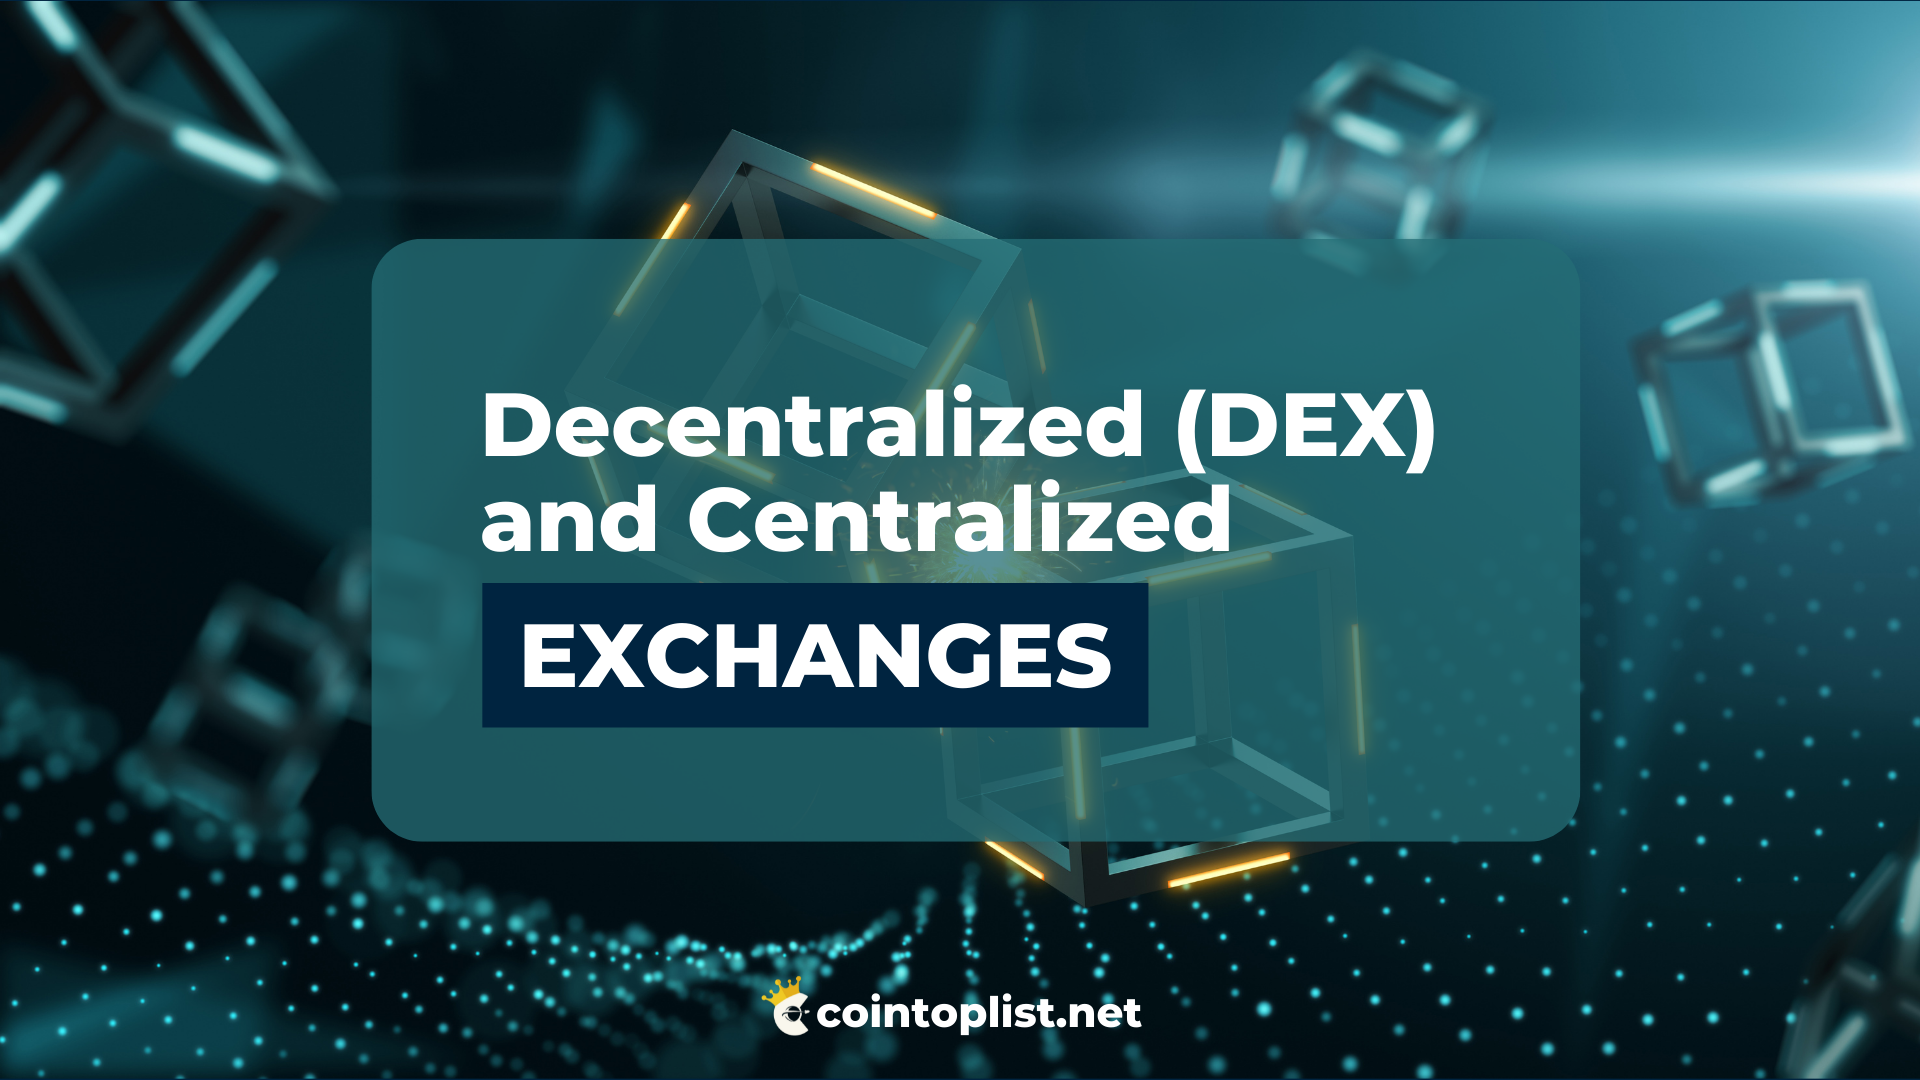 Decentralized (DEX) and Centralized Exchanges